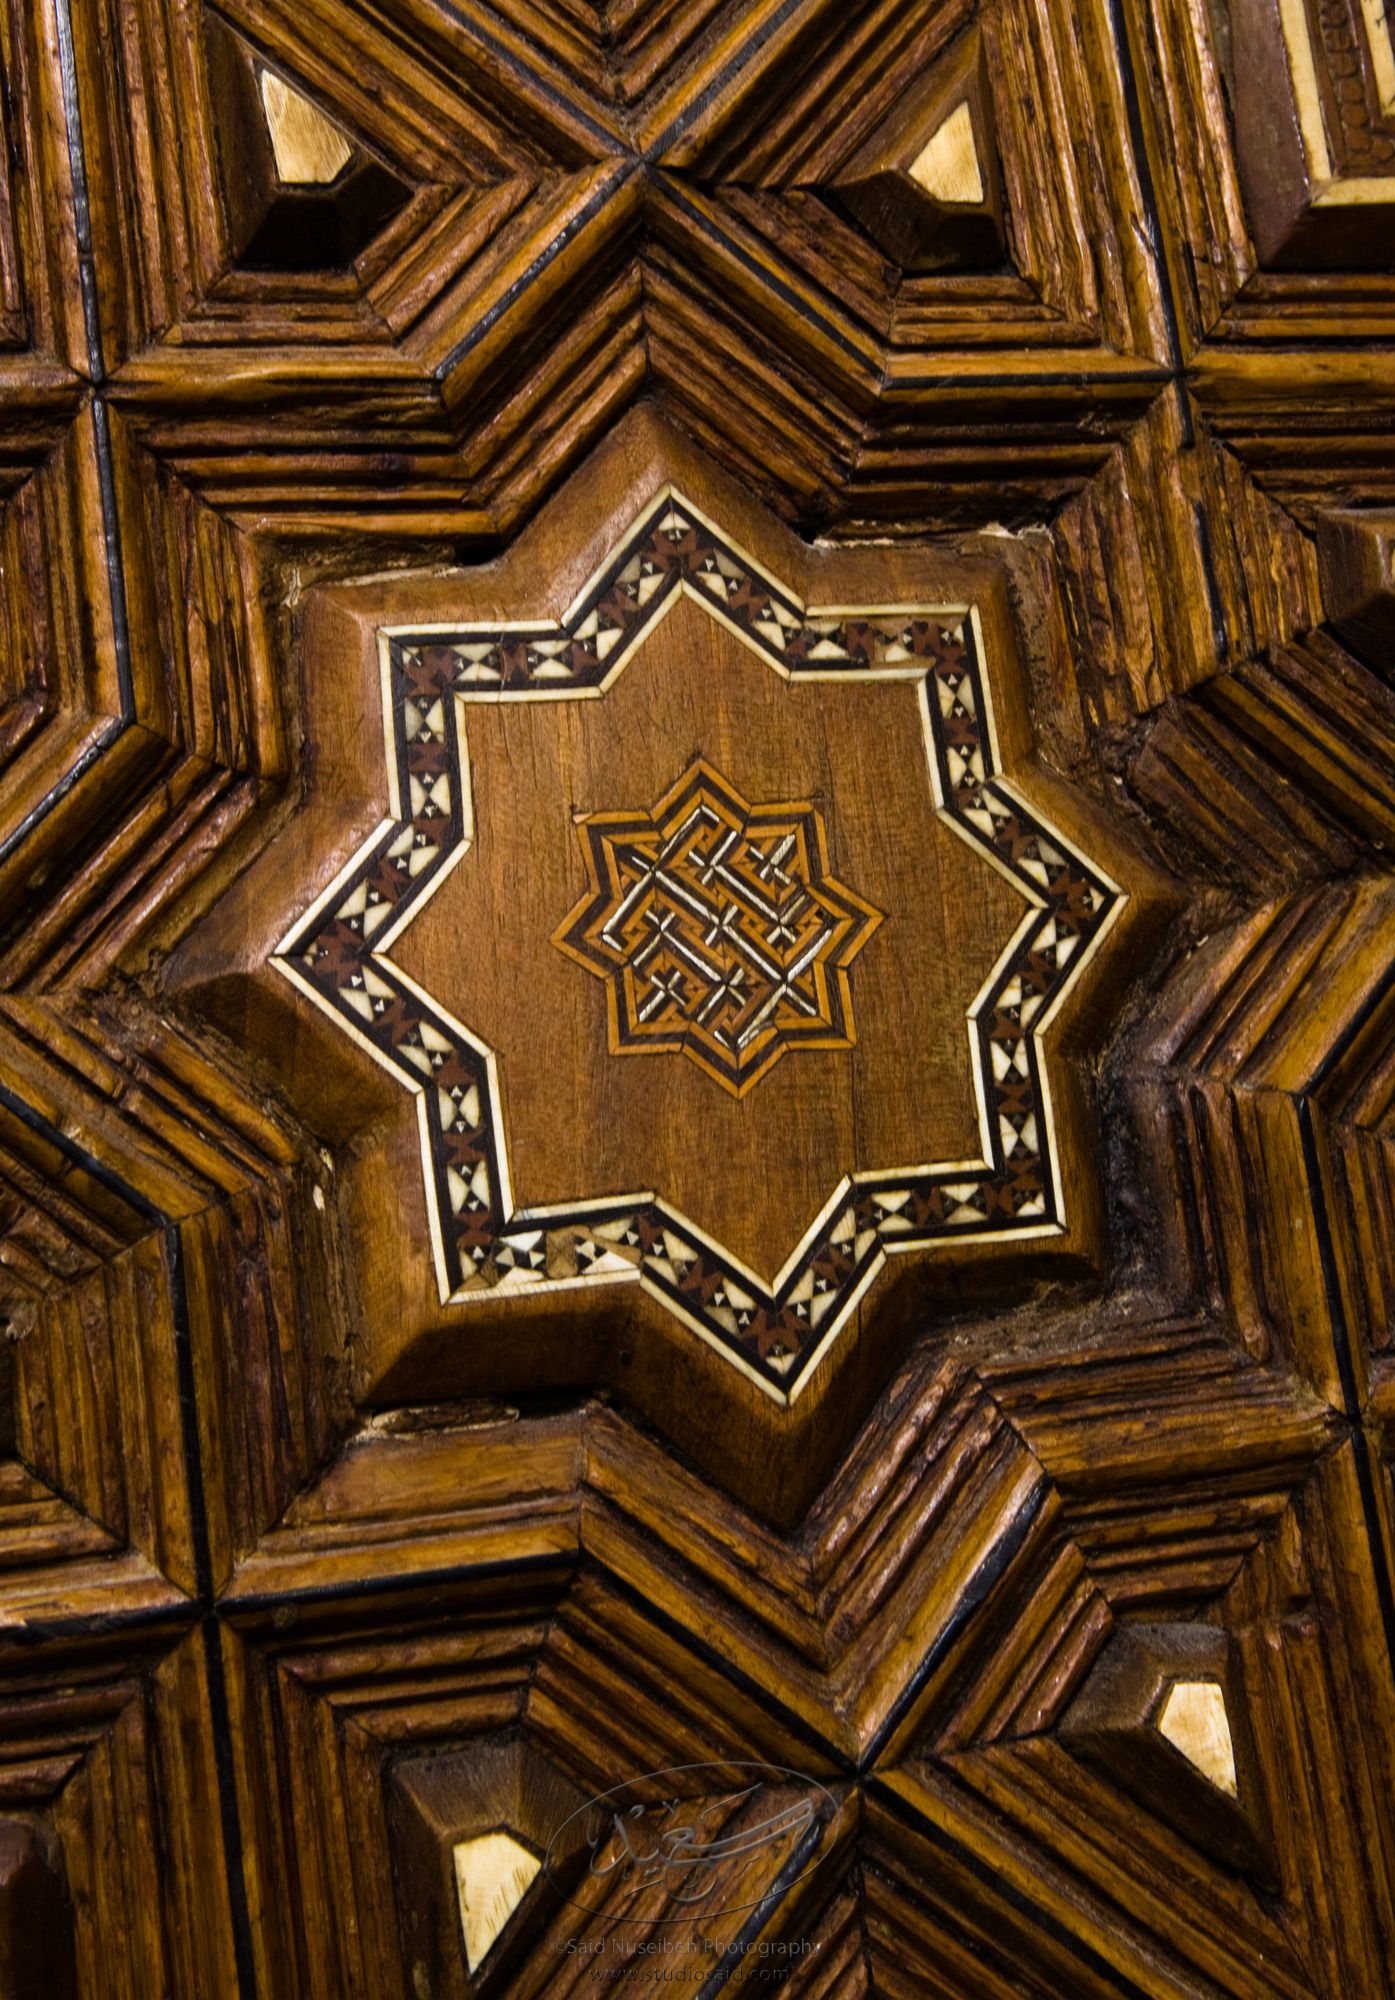 "Octagons. Minbar, Carved Woodwork and Inlay Detail"The late-13th / early-14th c. Mamluk minbar, or pulpit, of Sultan al-Nasir Muhammad, the ninth Mamluk Sultan from Cairo and son of Qalawun. The minbar was located in the Umayyad Mosque in Aleppo, Haleb, prior to its damage and disappearance in May 2013.